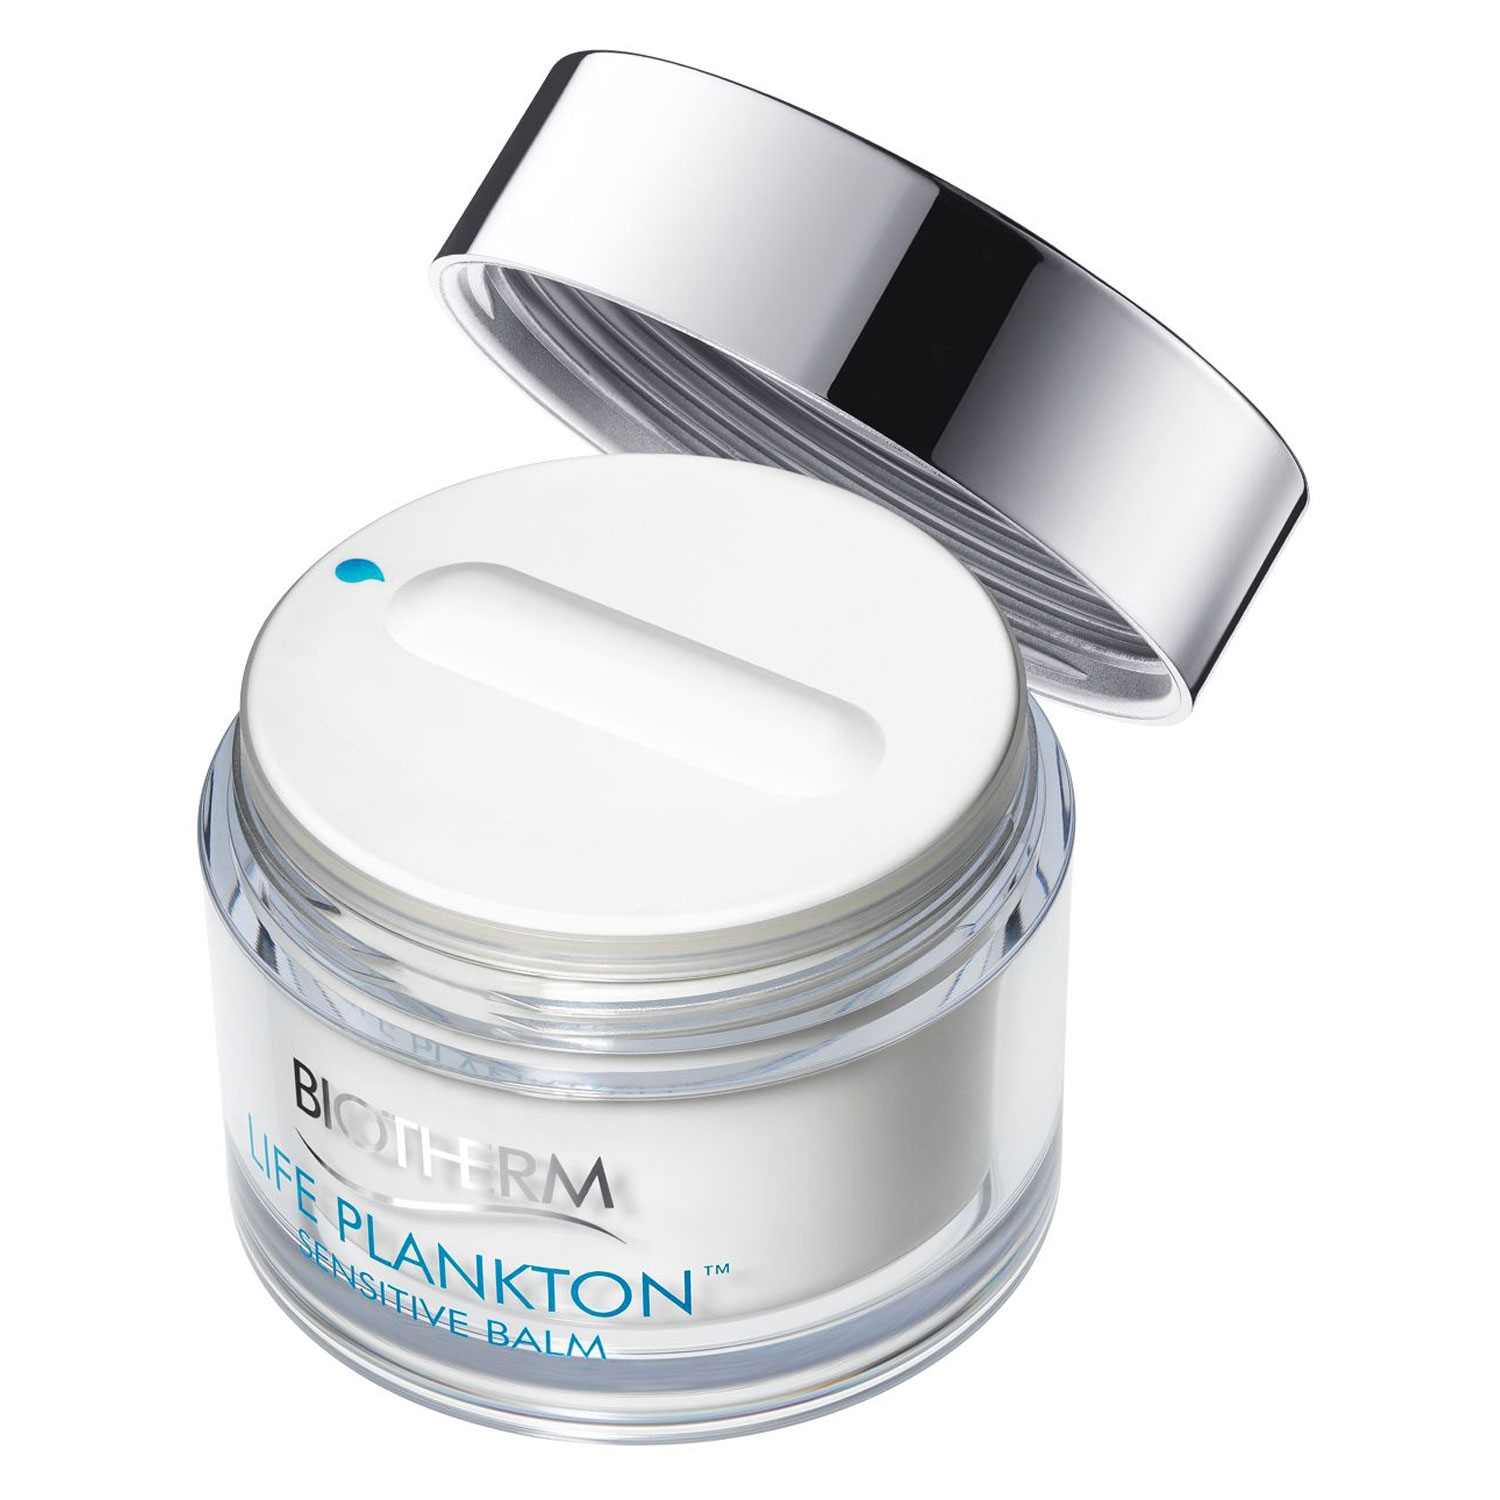 Product image from Life Plankton - Sensitive Balm